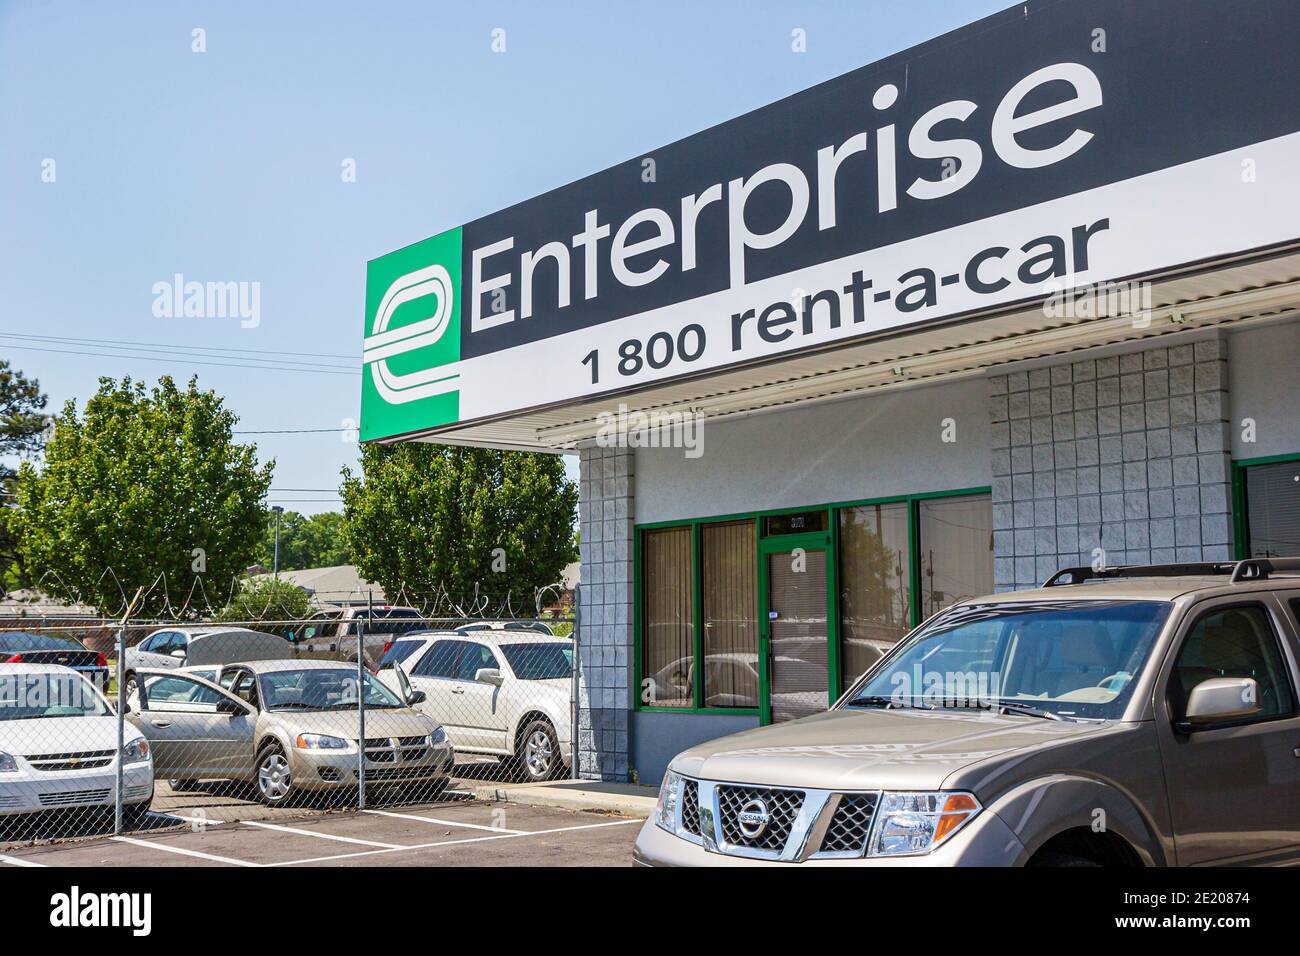 Alabama Montgomery Enterprise Rent a car,sign logo toll free telephone phone number,lot cars vehicles business outside exterior front entrance, Stock Photo